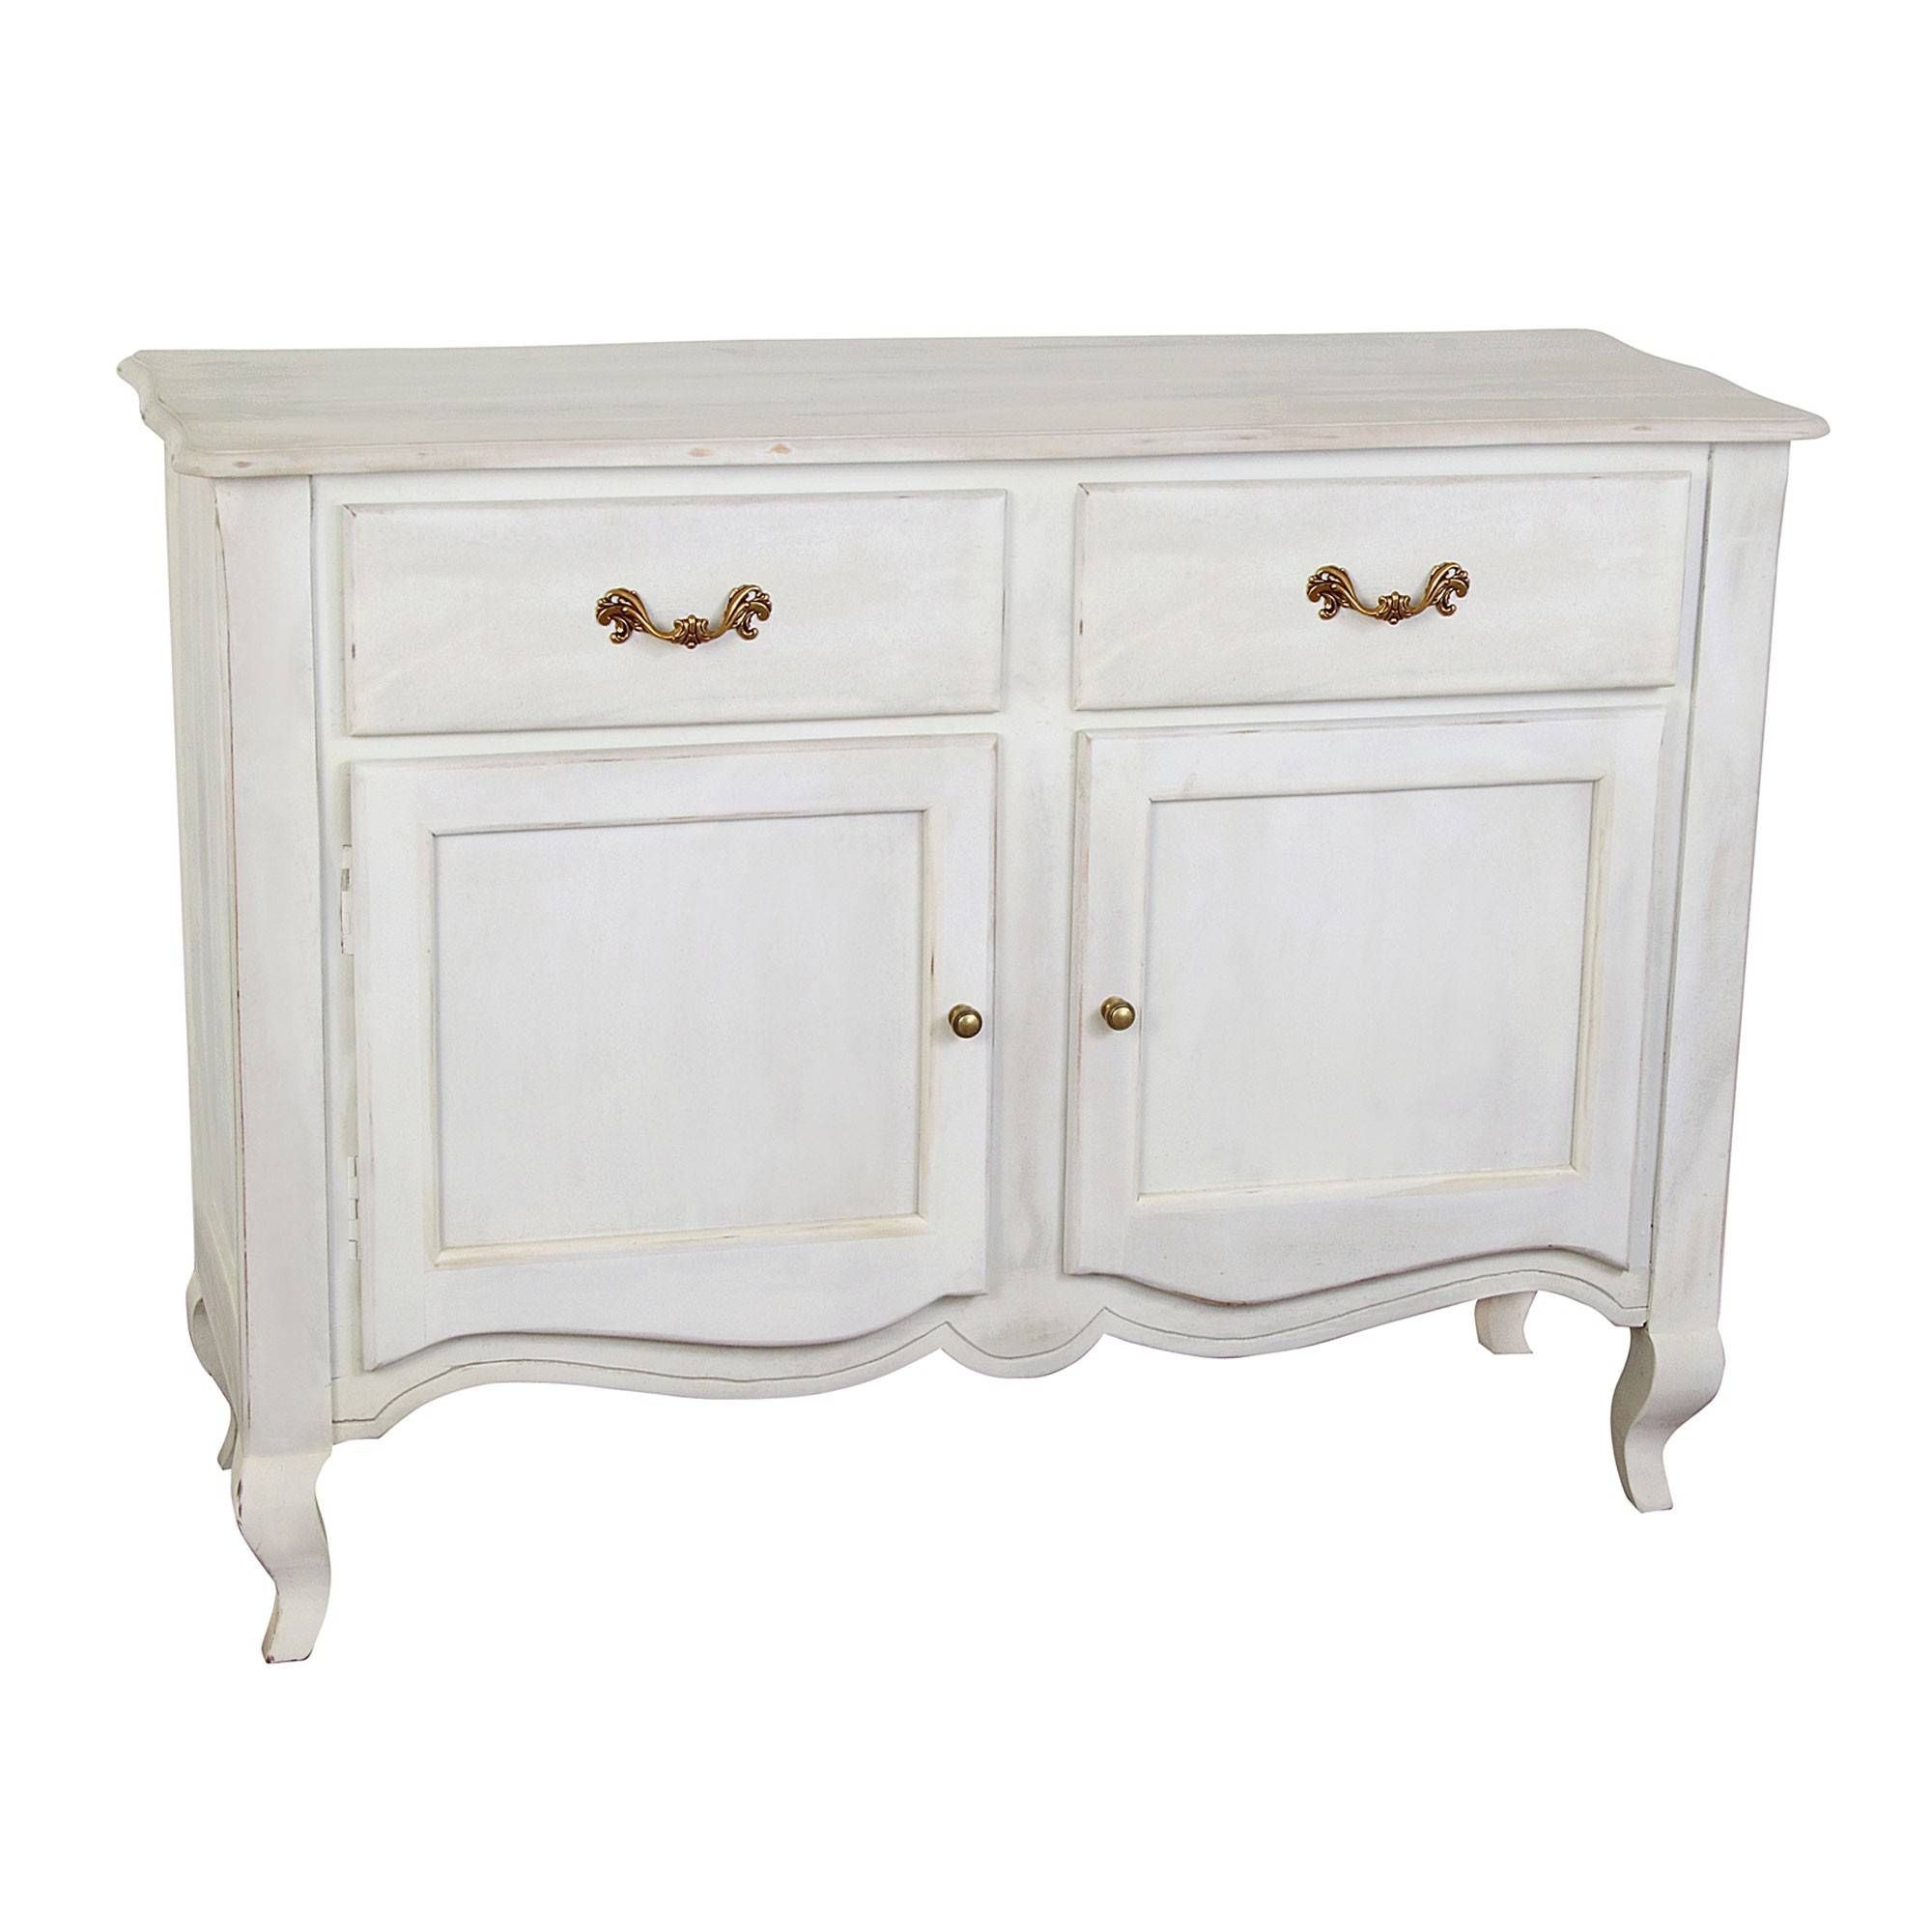 New Orleans Distressed White Finish Vintage Sideboard – Homescapes For White Distressed Finish Sideboards (View 3 of 15)